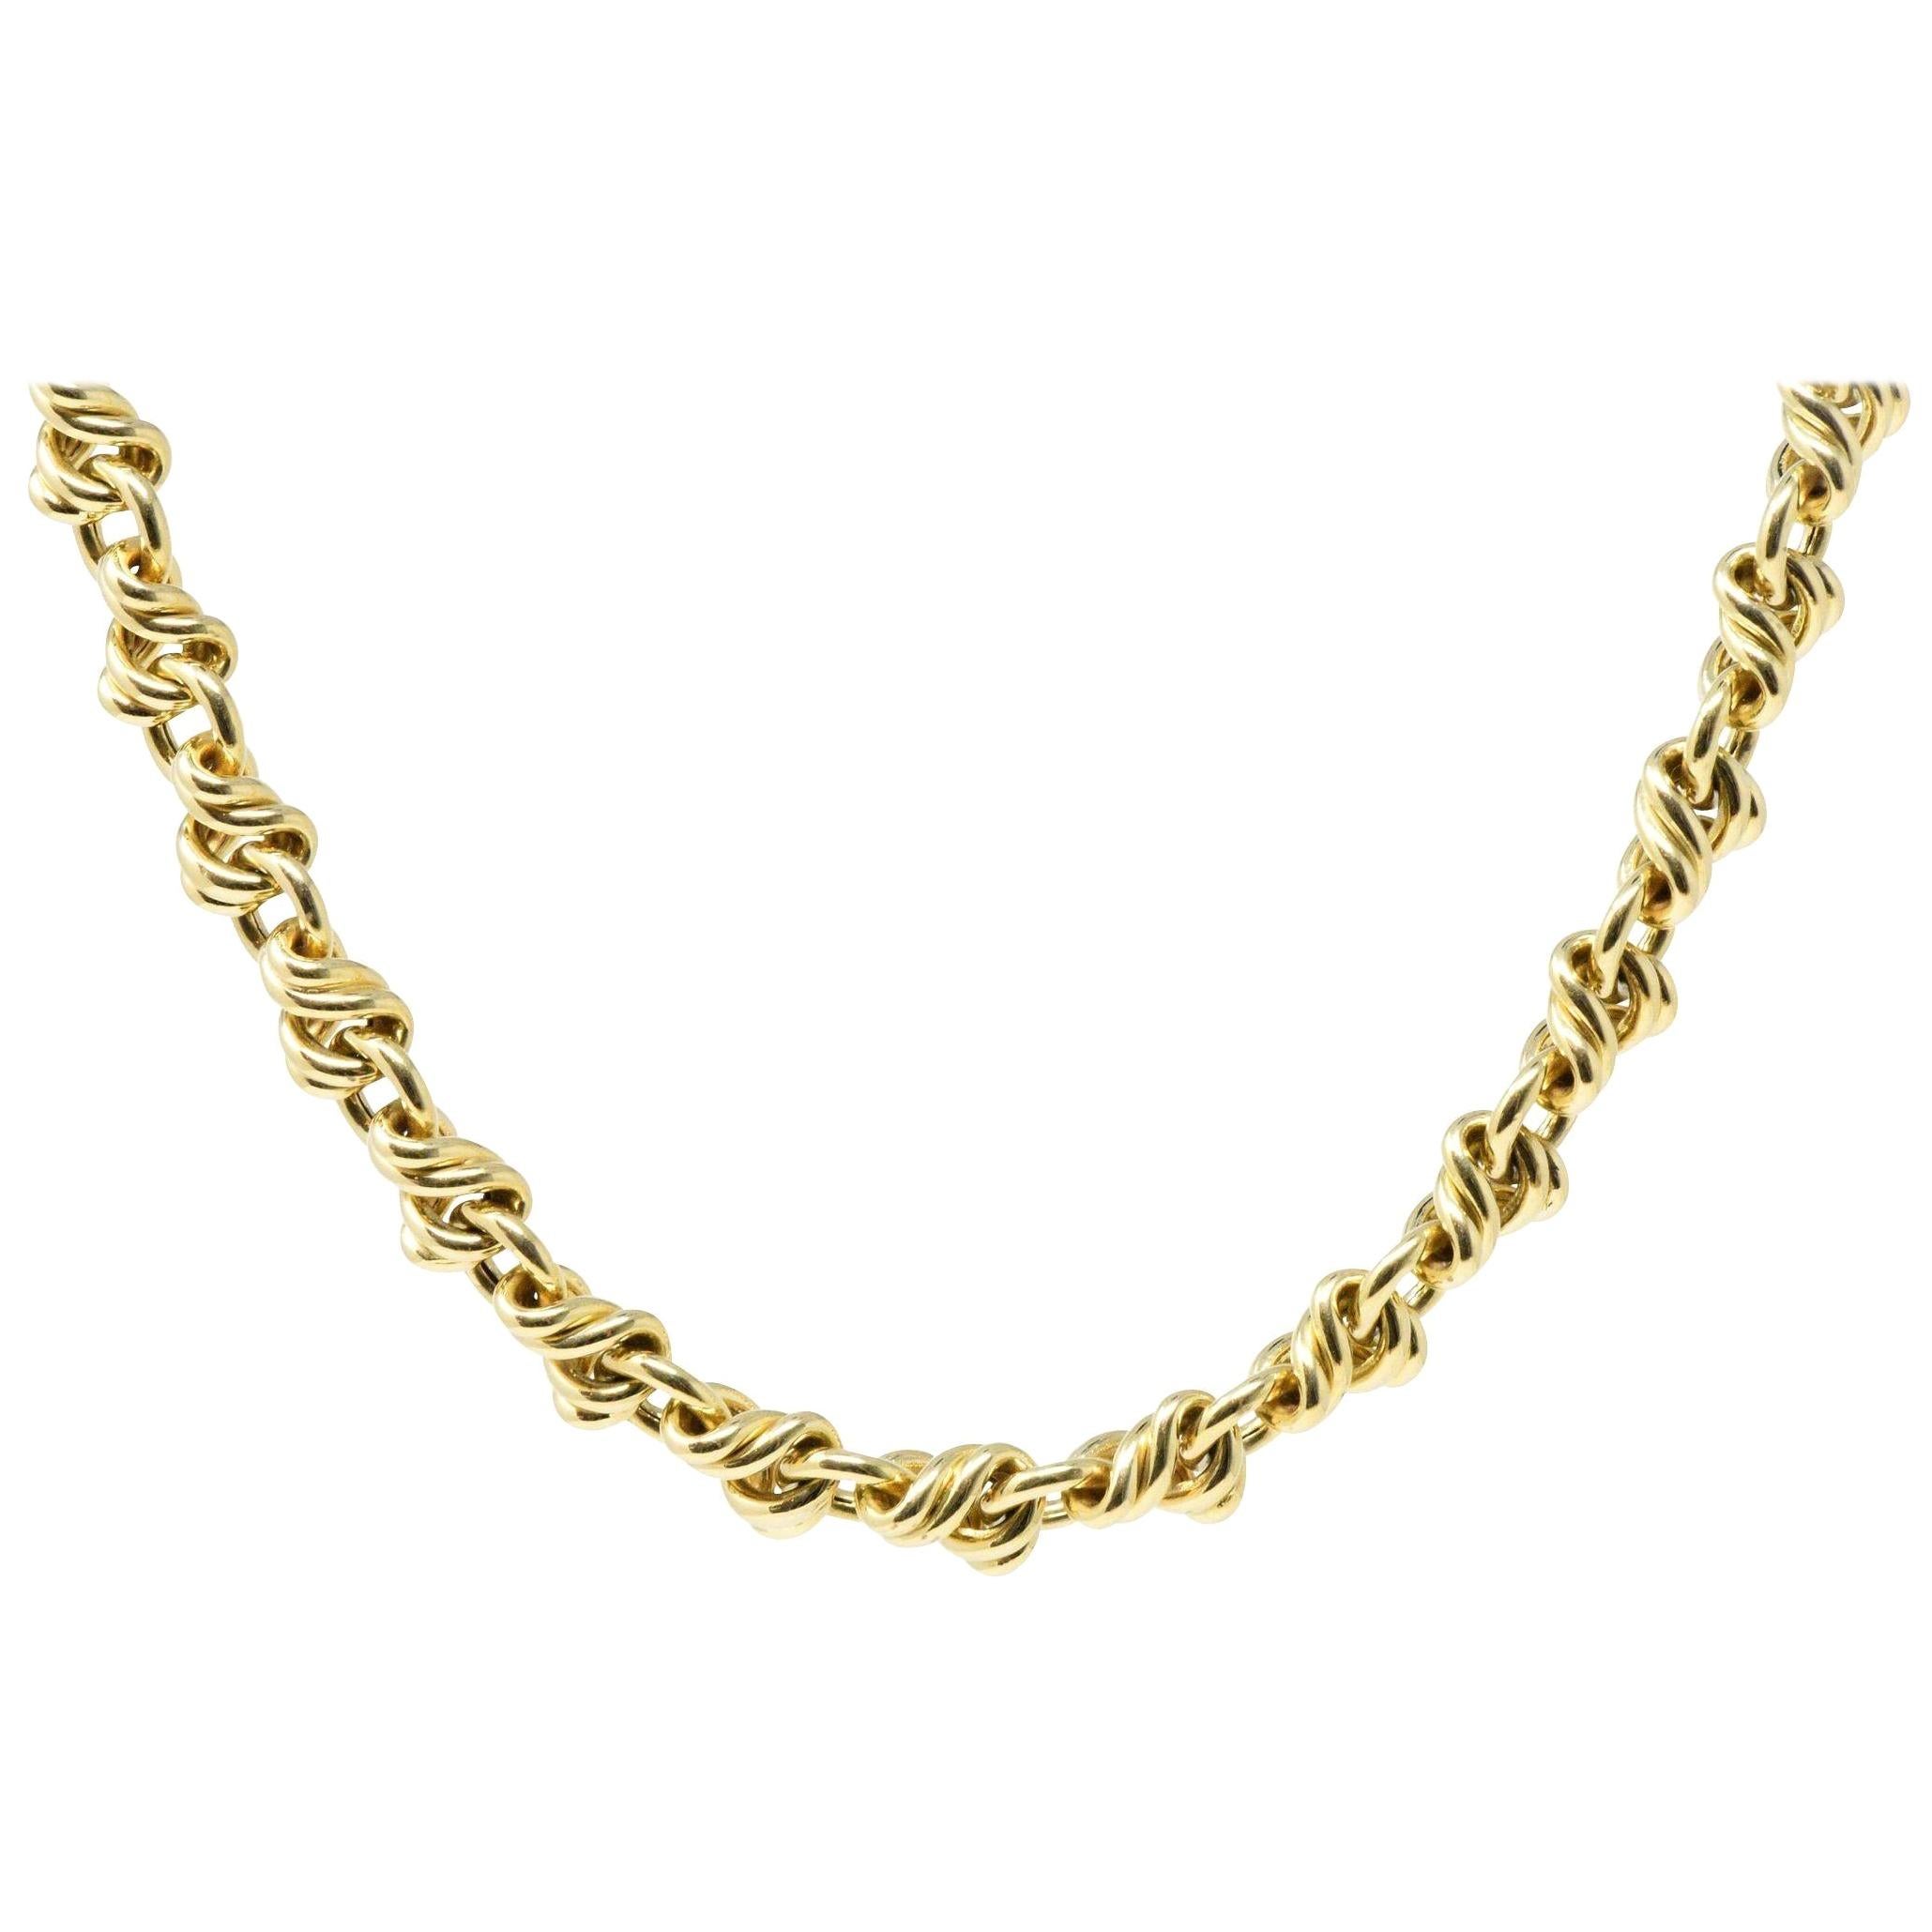 Sophisticated Tiffany & Co. 18 Karat Gold Twisted Link Collar Necklace